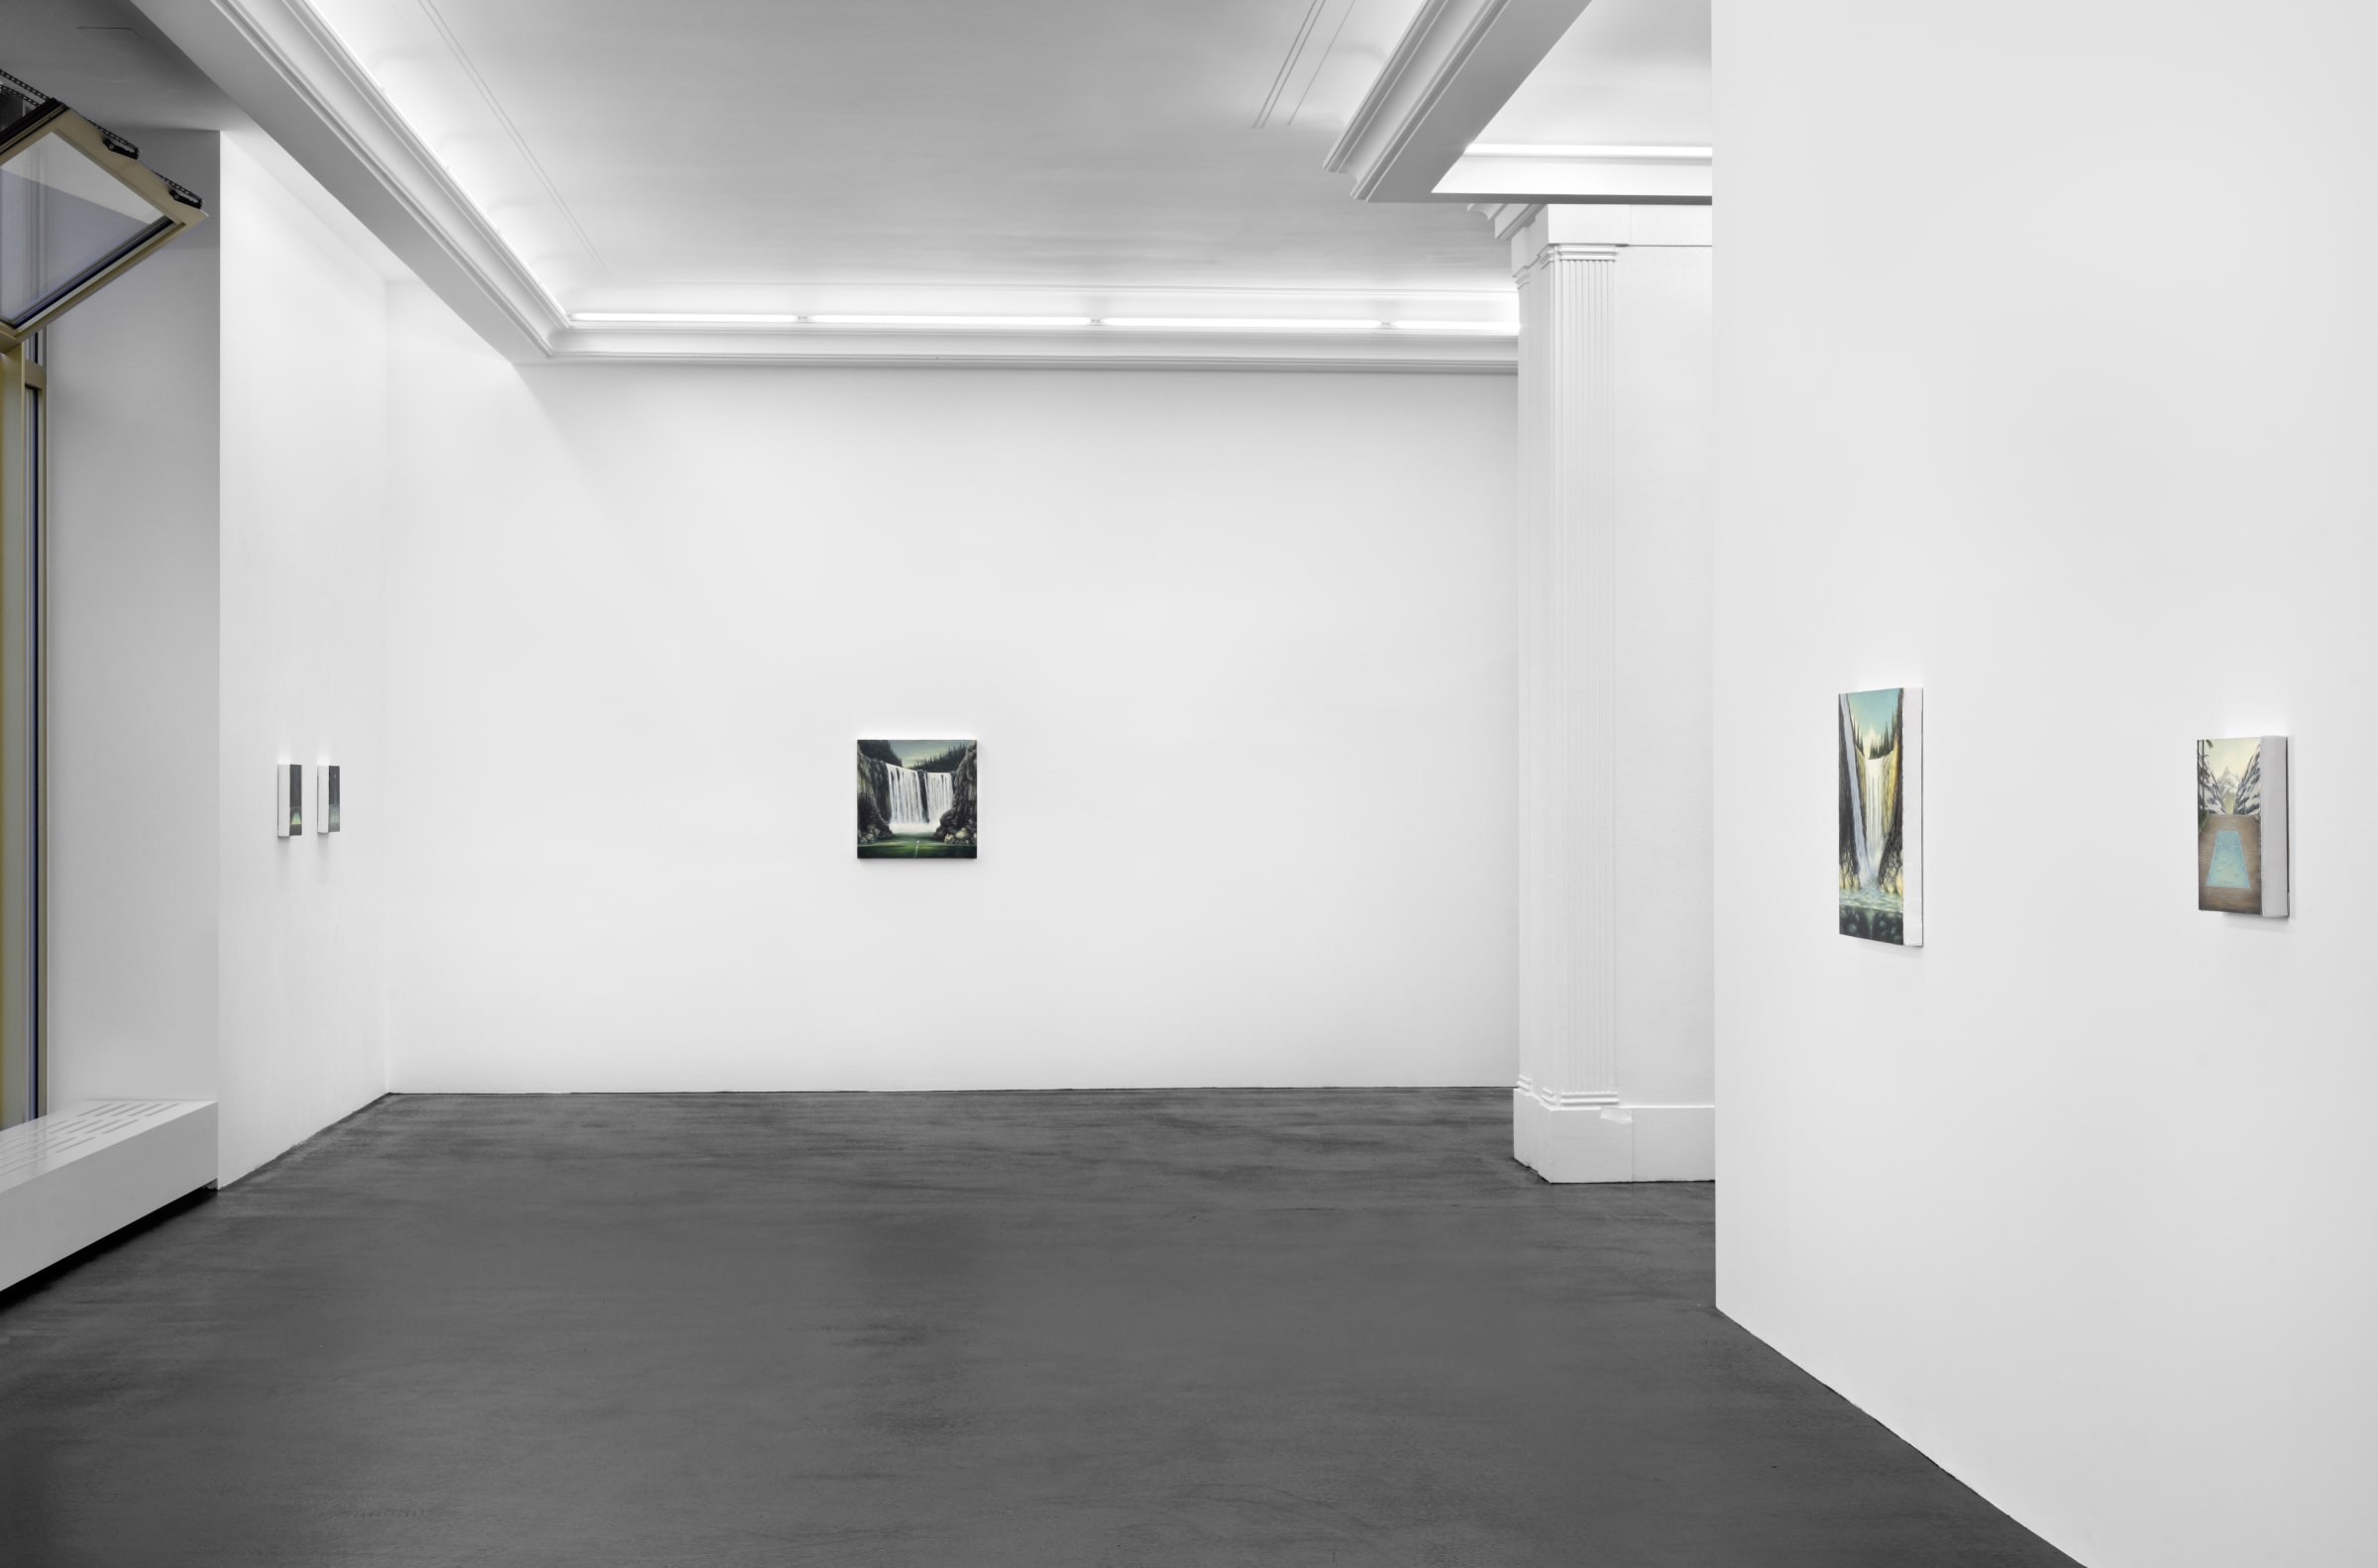 Dan Attoe Landscapes with Water Installation View March 1 – April 19, 2014 Peres Projects, Berlin